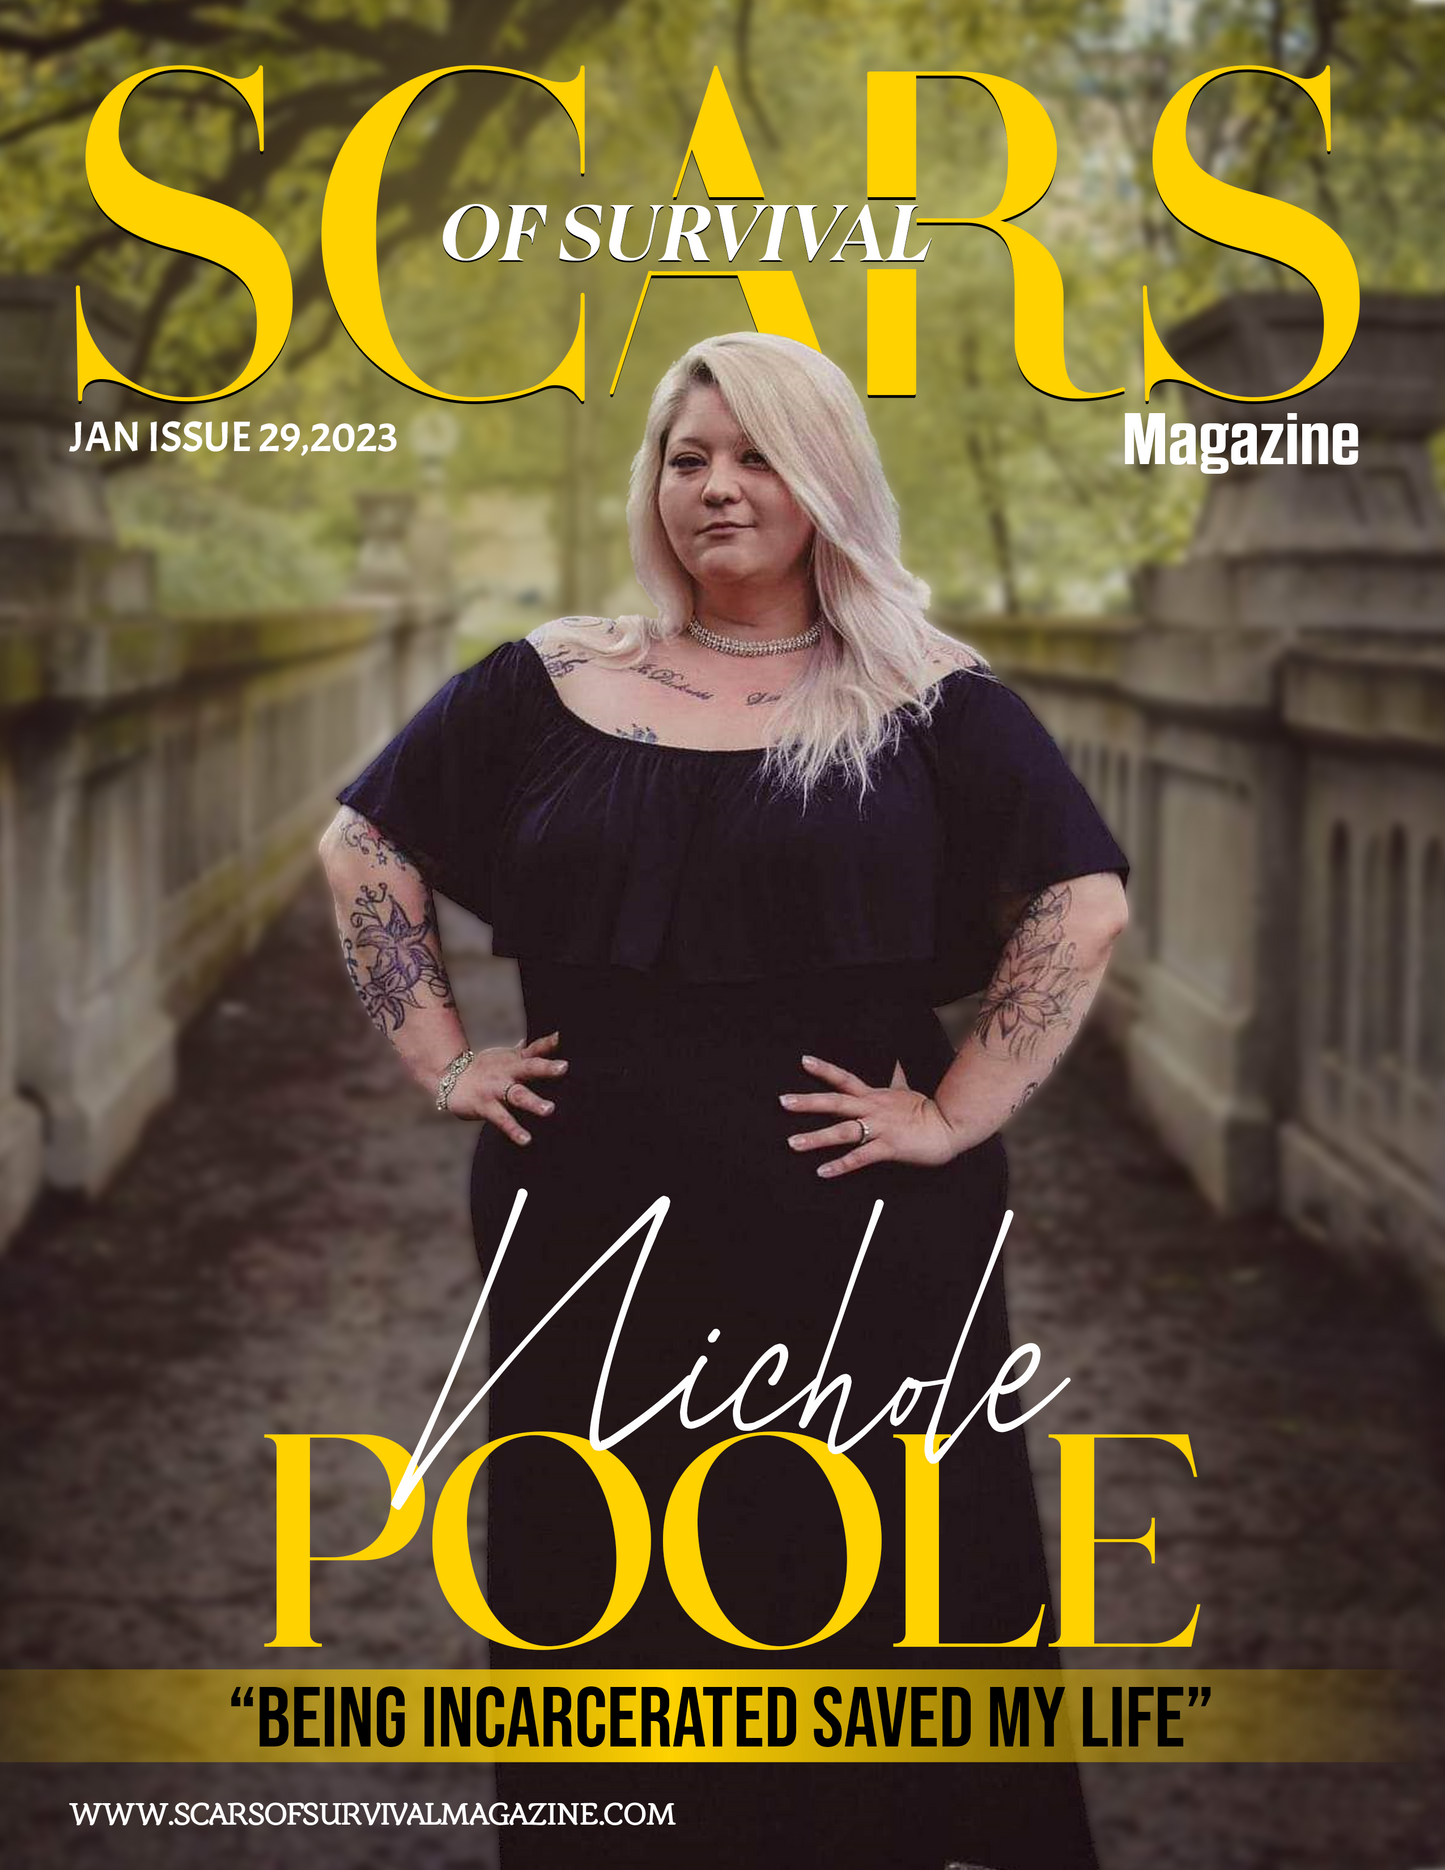 January 2023 Issue 29 Being Incarcerated Saved My Life Nichole Poole